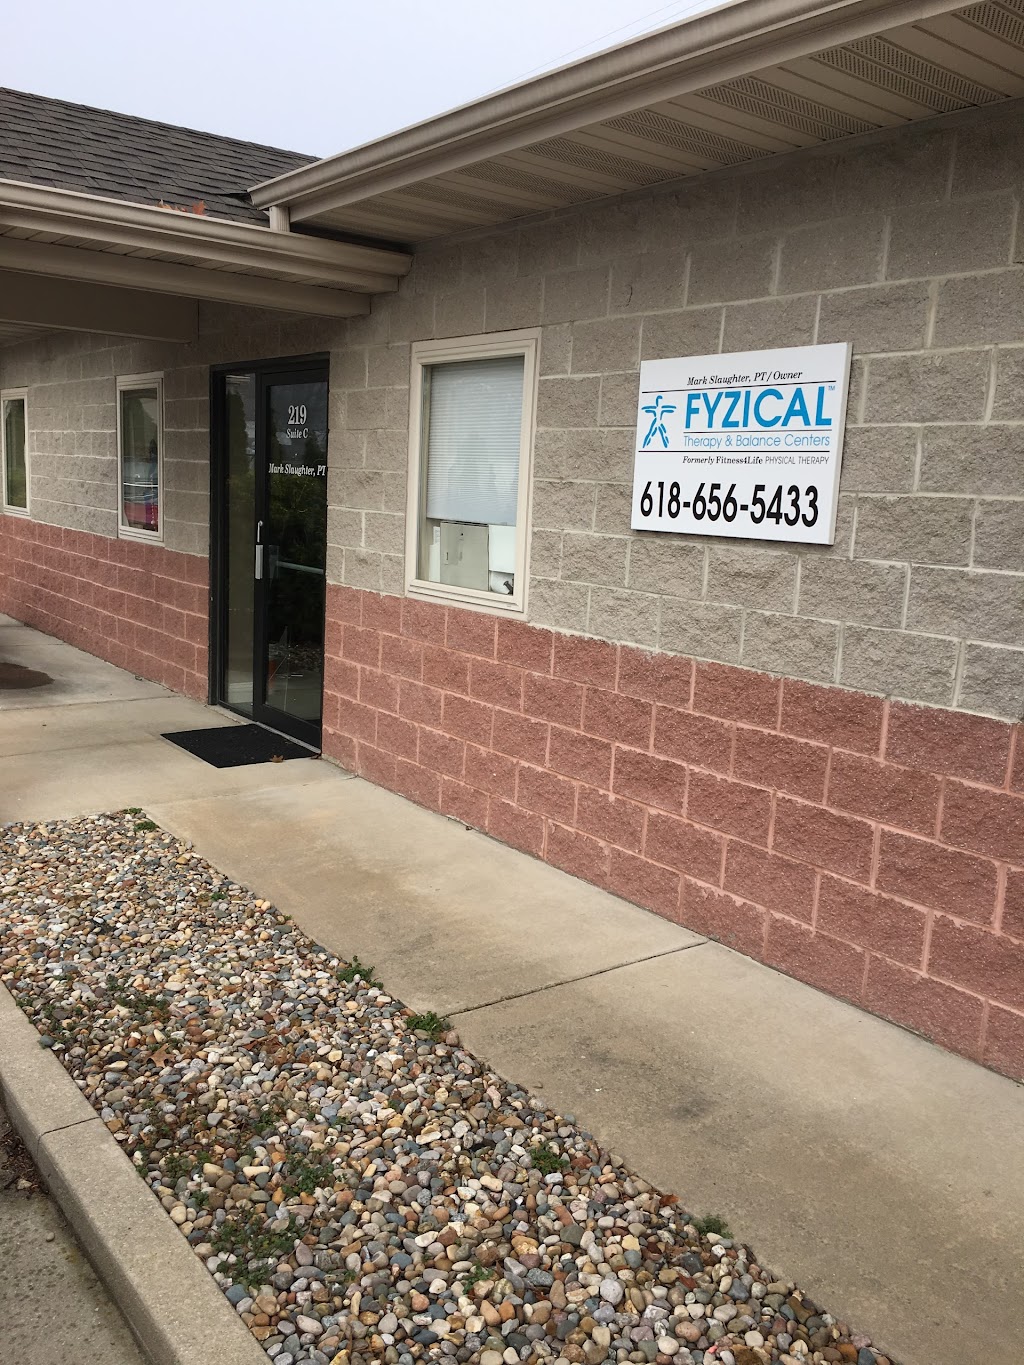 Fitness 4 Life Physical Therapy | 219 2nd Ave STE C, Edwardsville, IL 62025 | Phone: (618) 656-5433